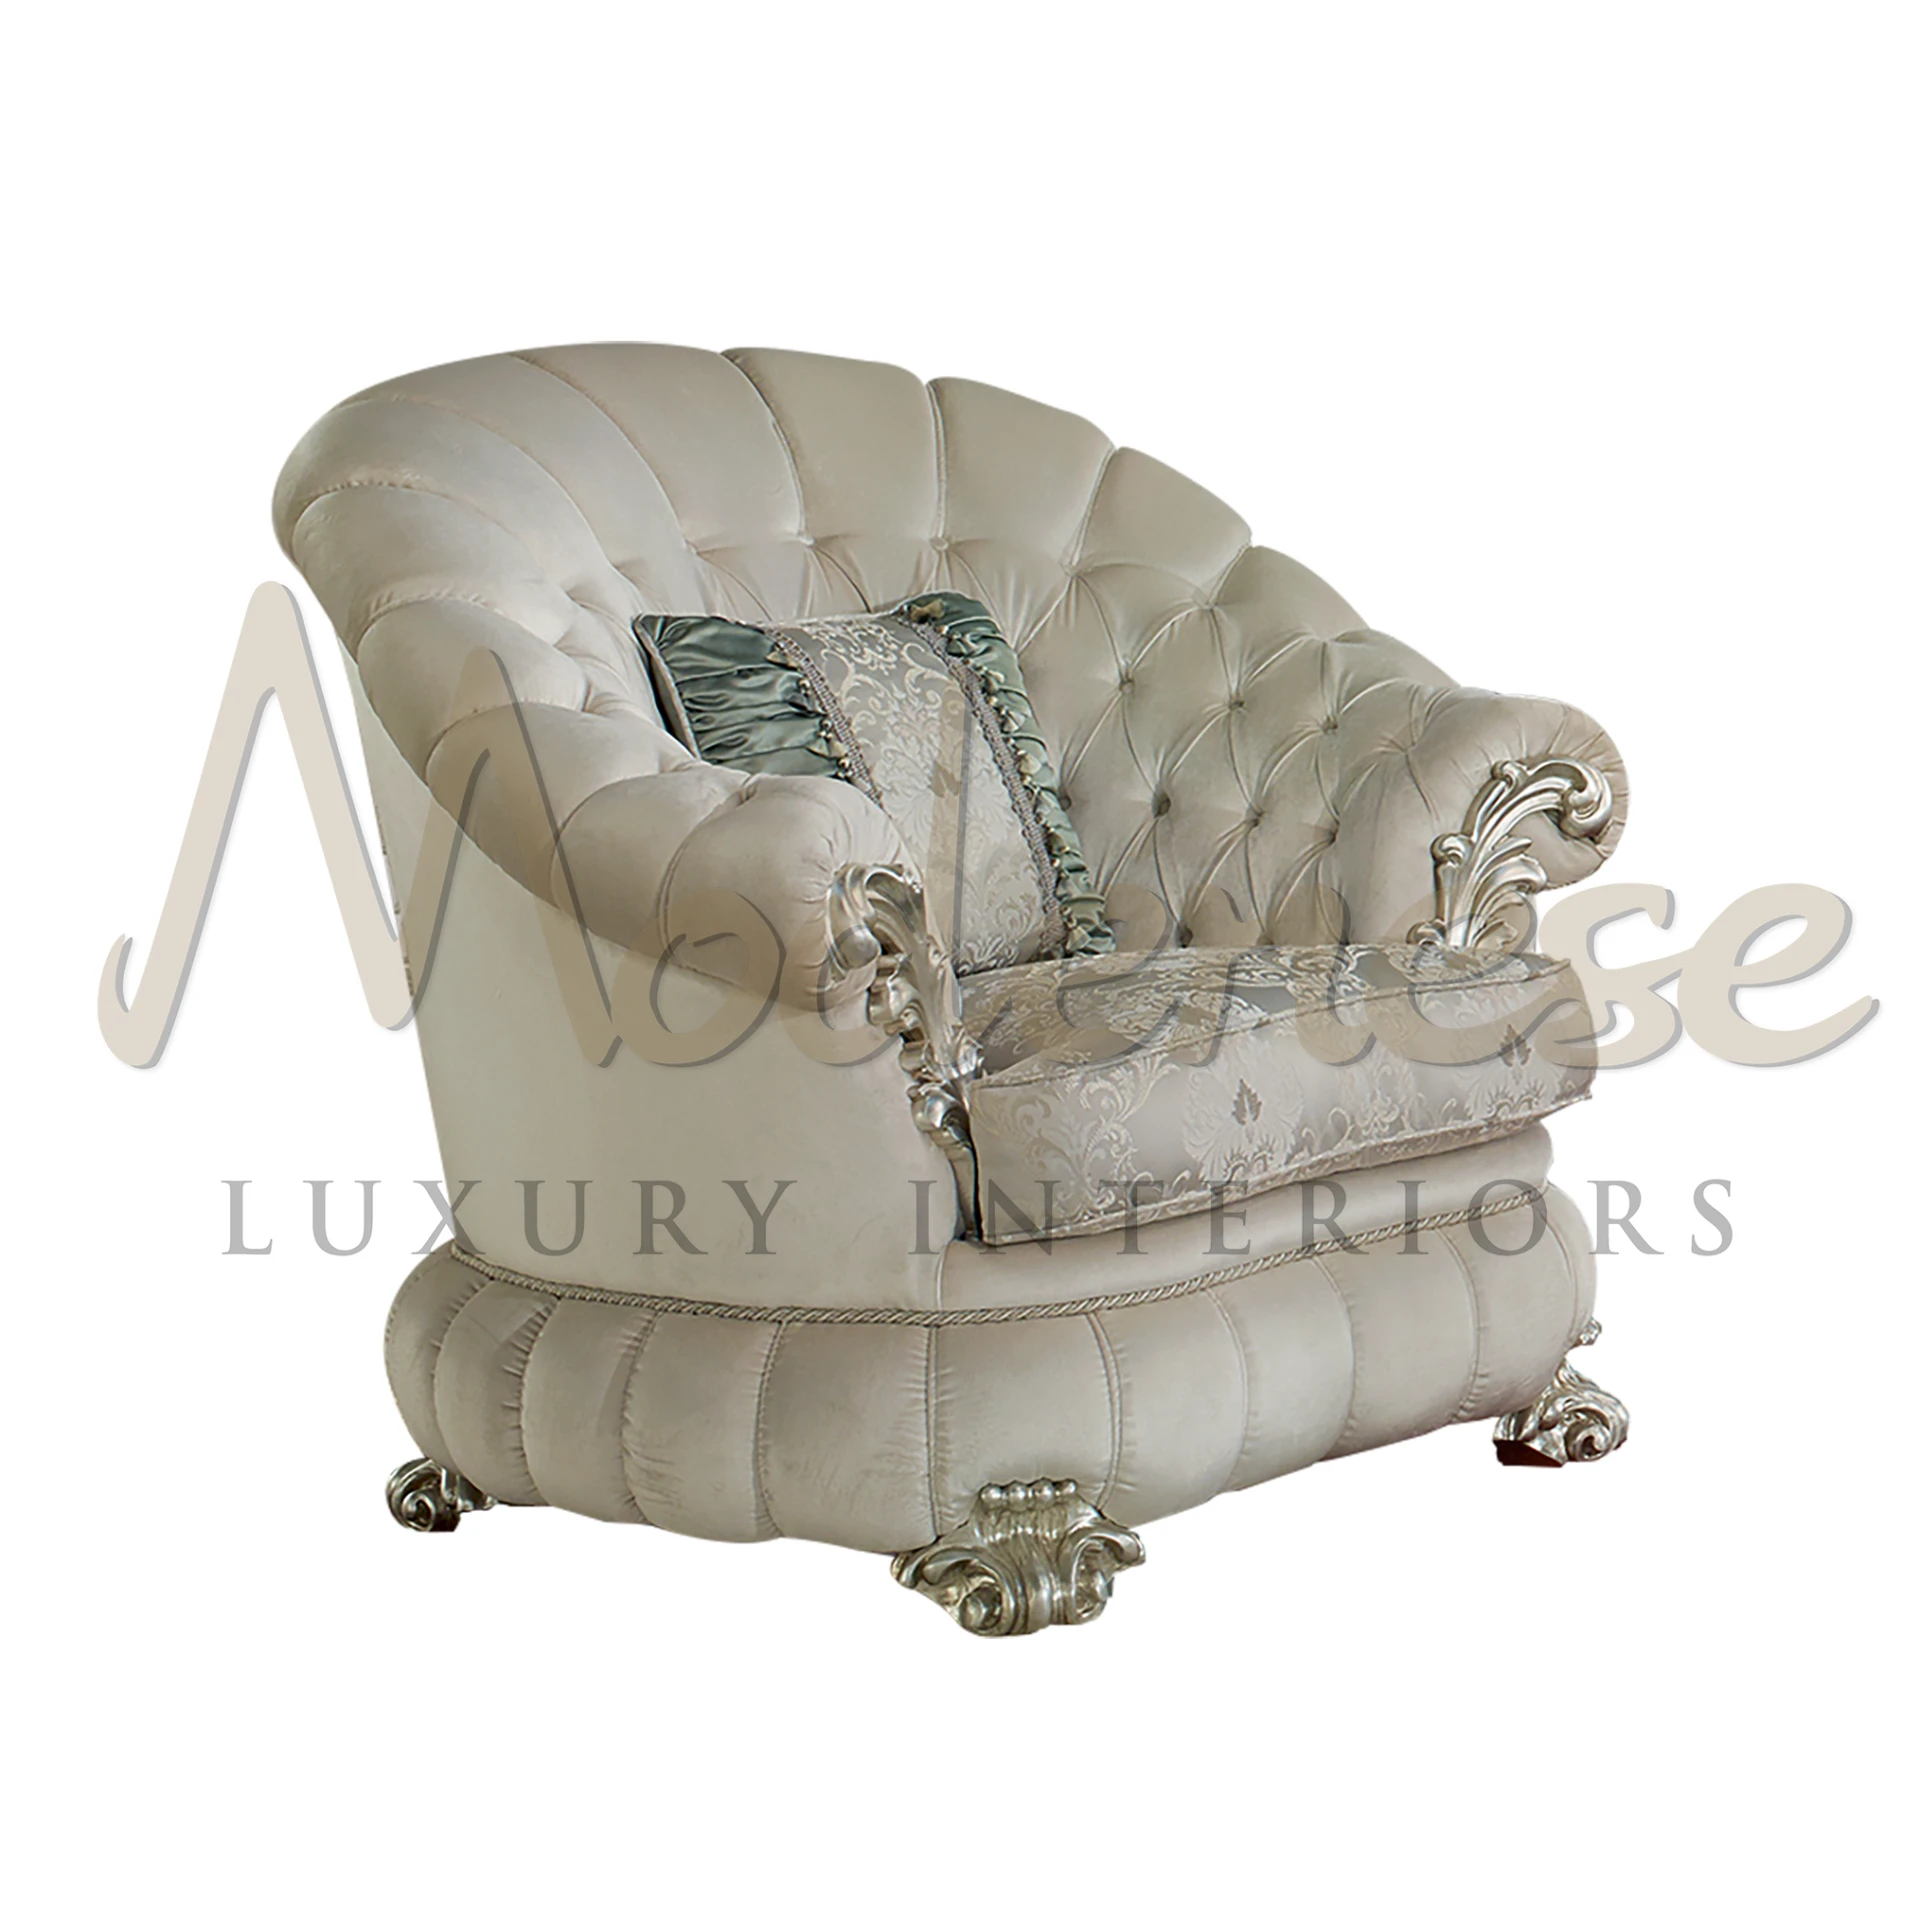  Elegant Curvy Upholstered Armchair in high-quality velvet, designed for stylish comfort with tufting and piping details.
